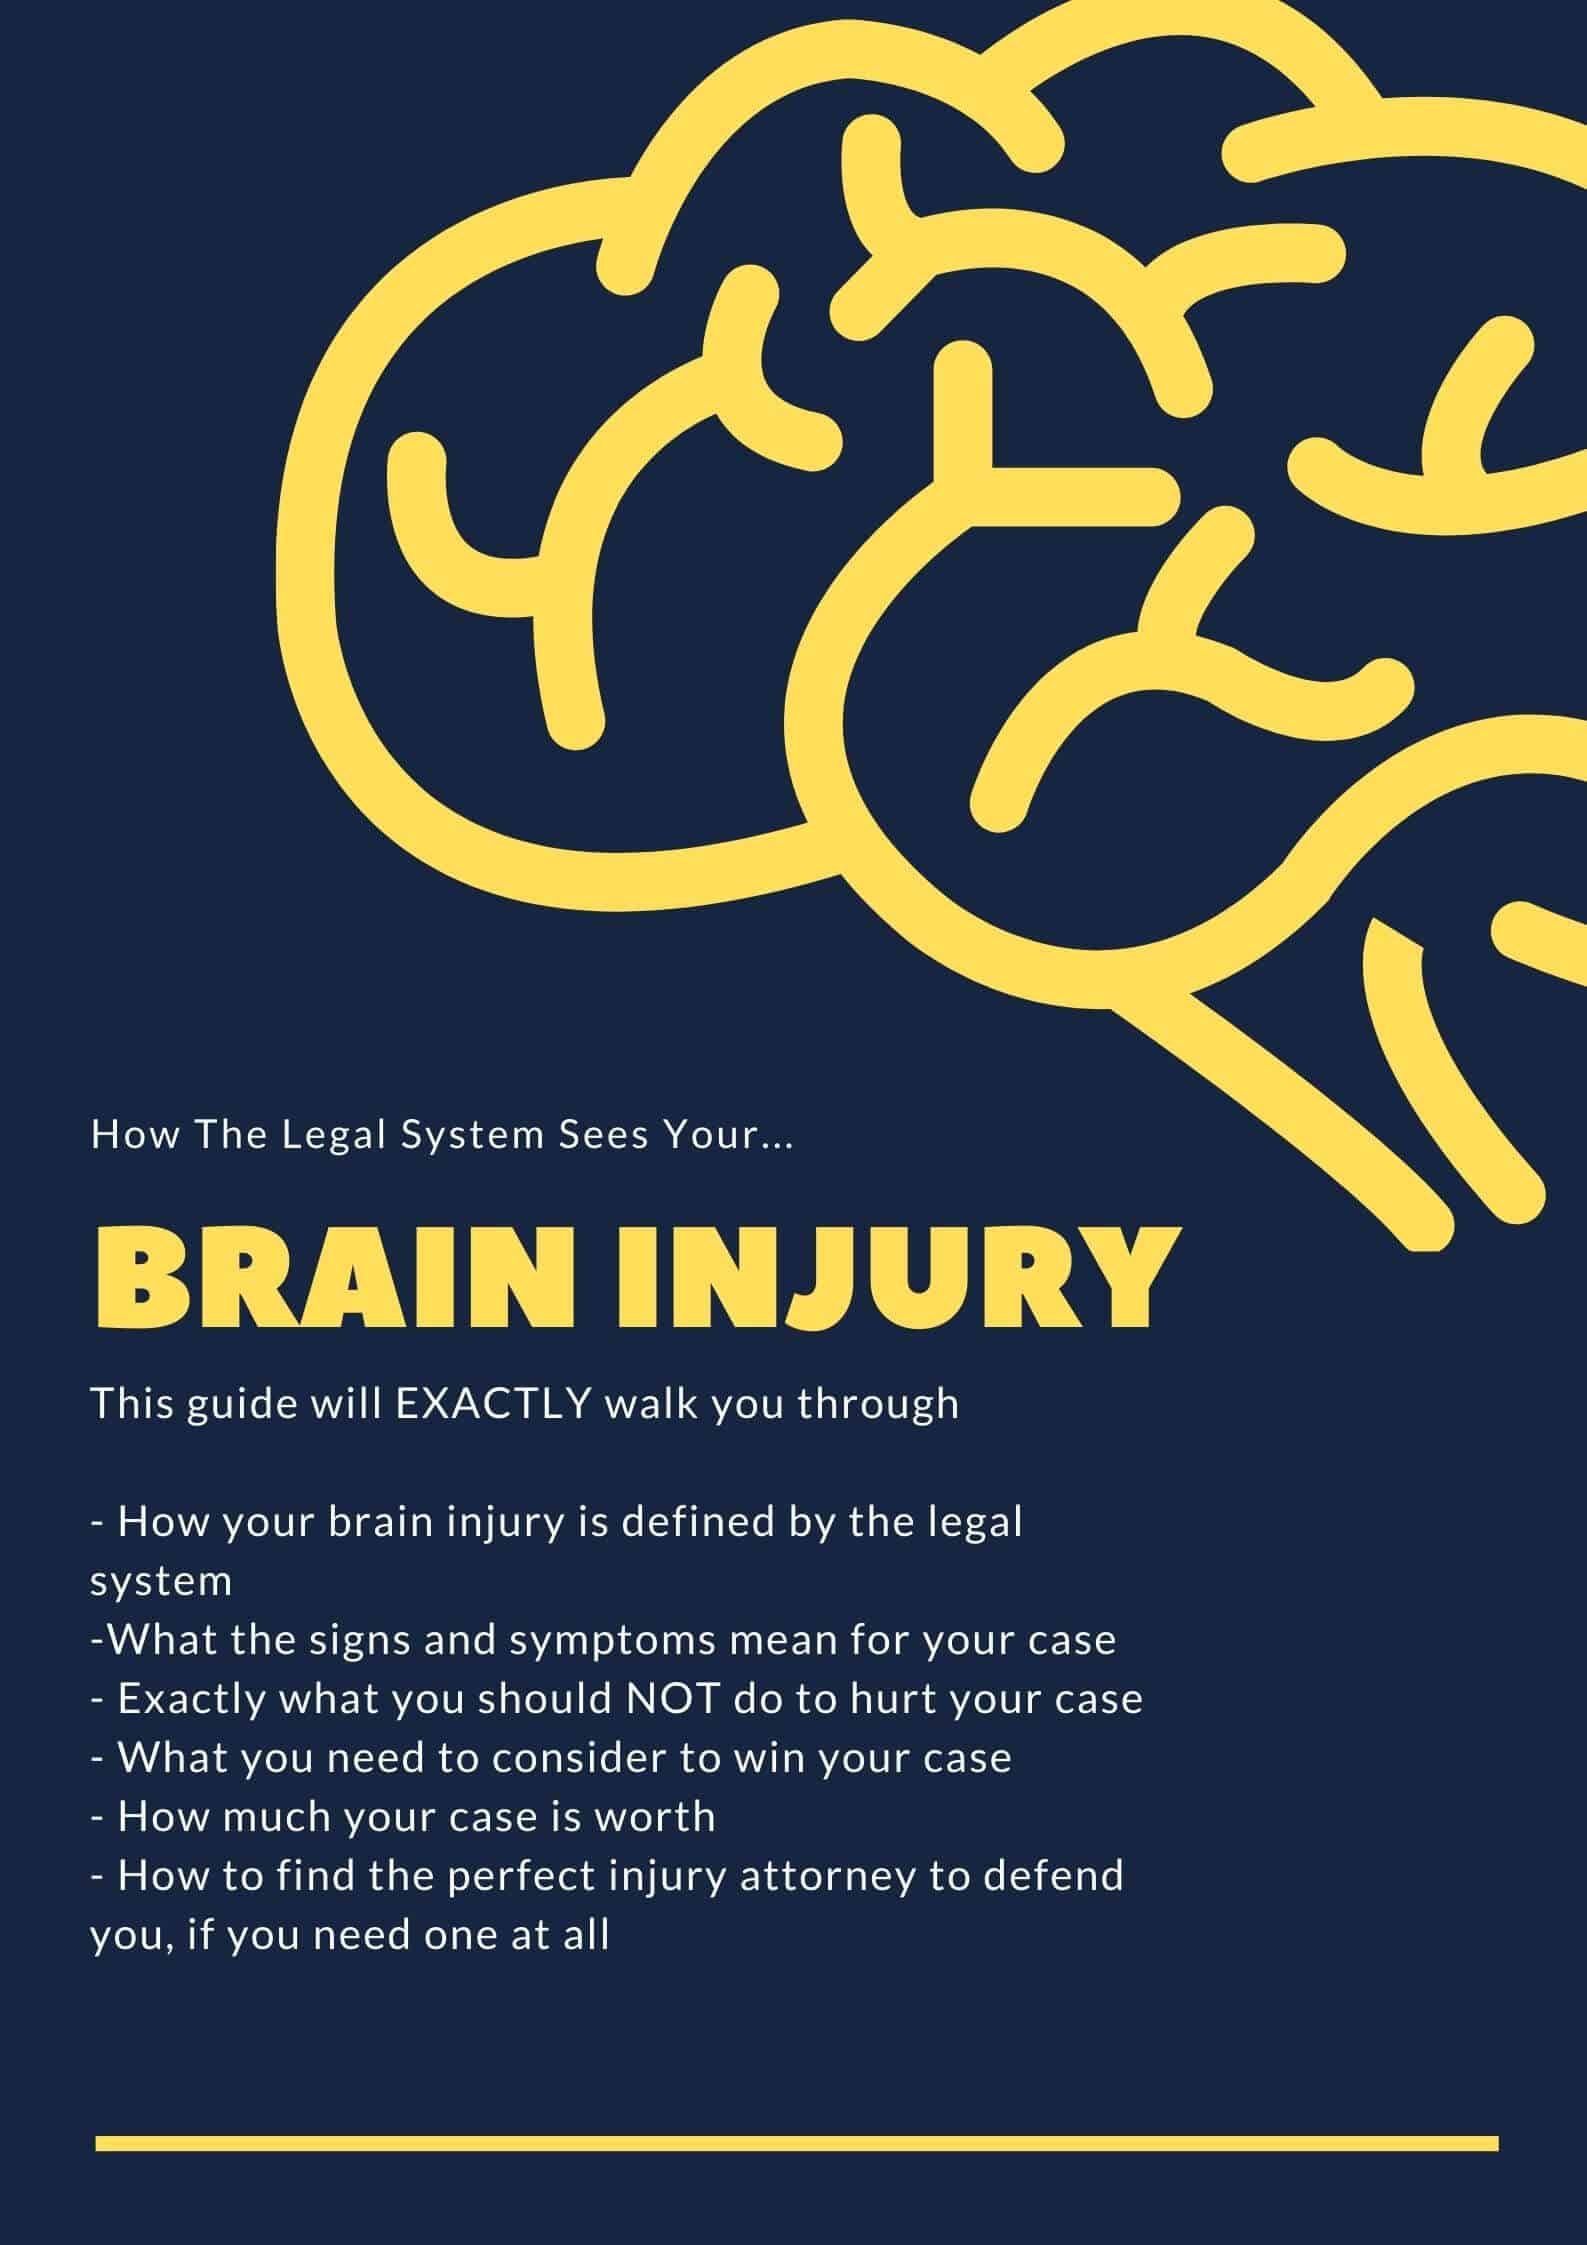 How to choose a brain injury attorney in Florida